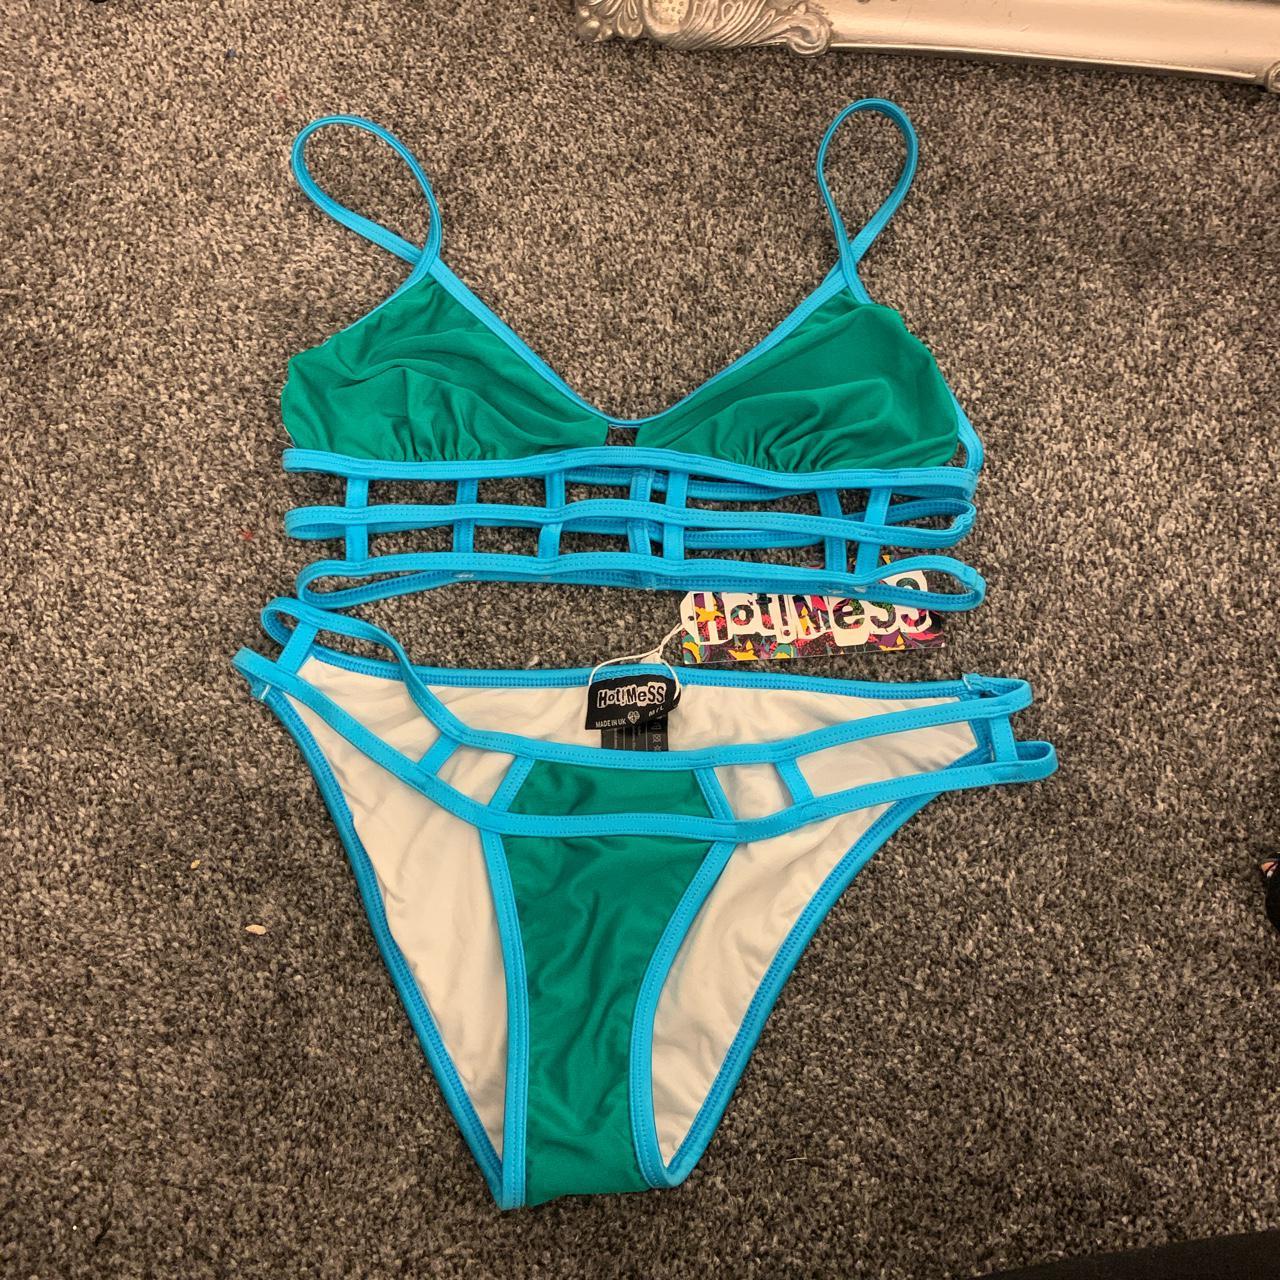 & Other Stories Women's Bikinis-and-tankini-sets | Depop